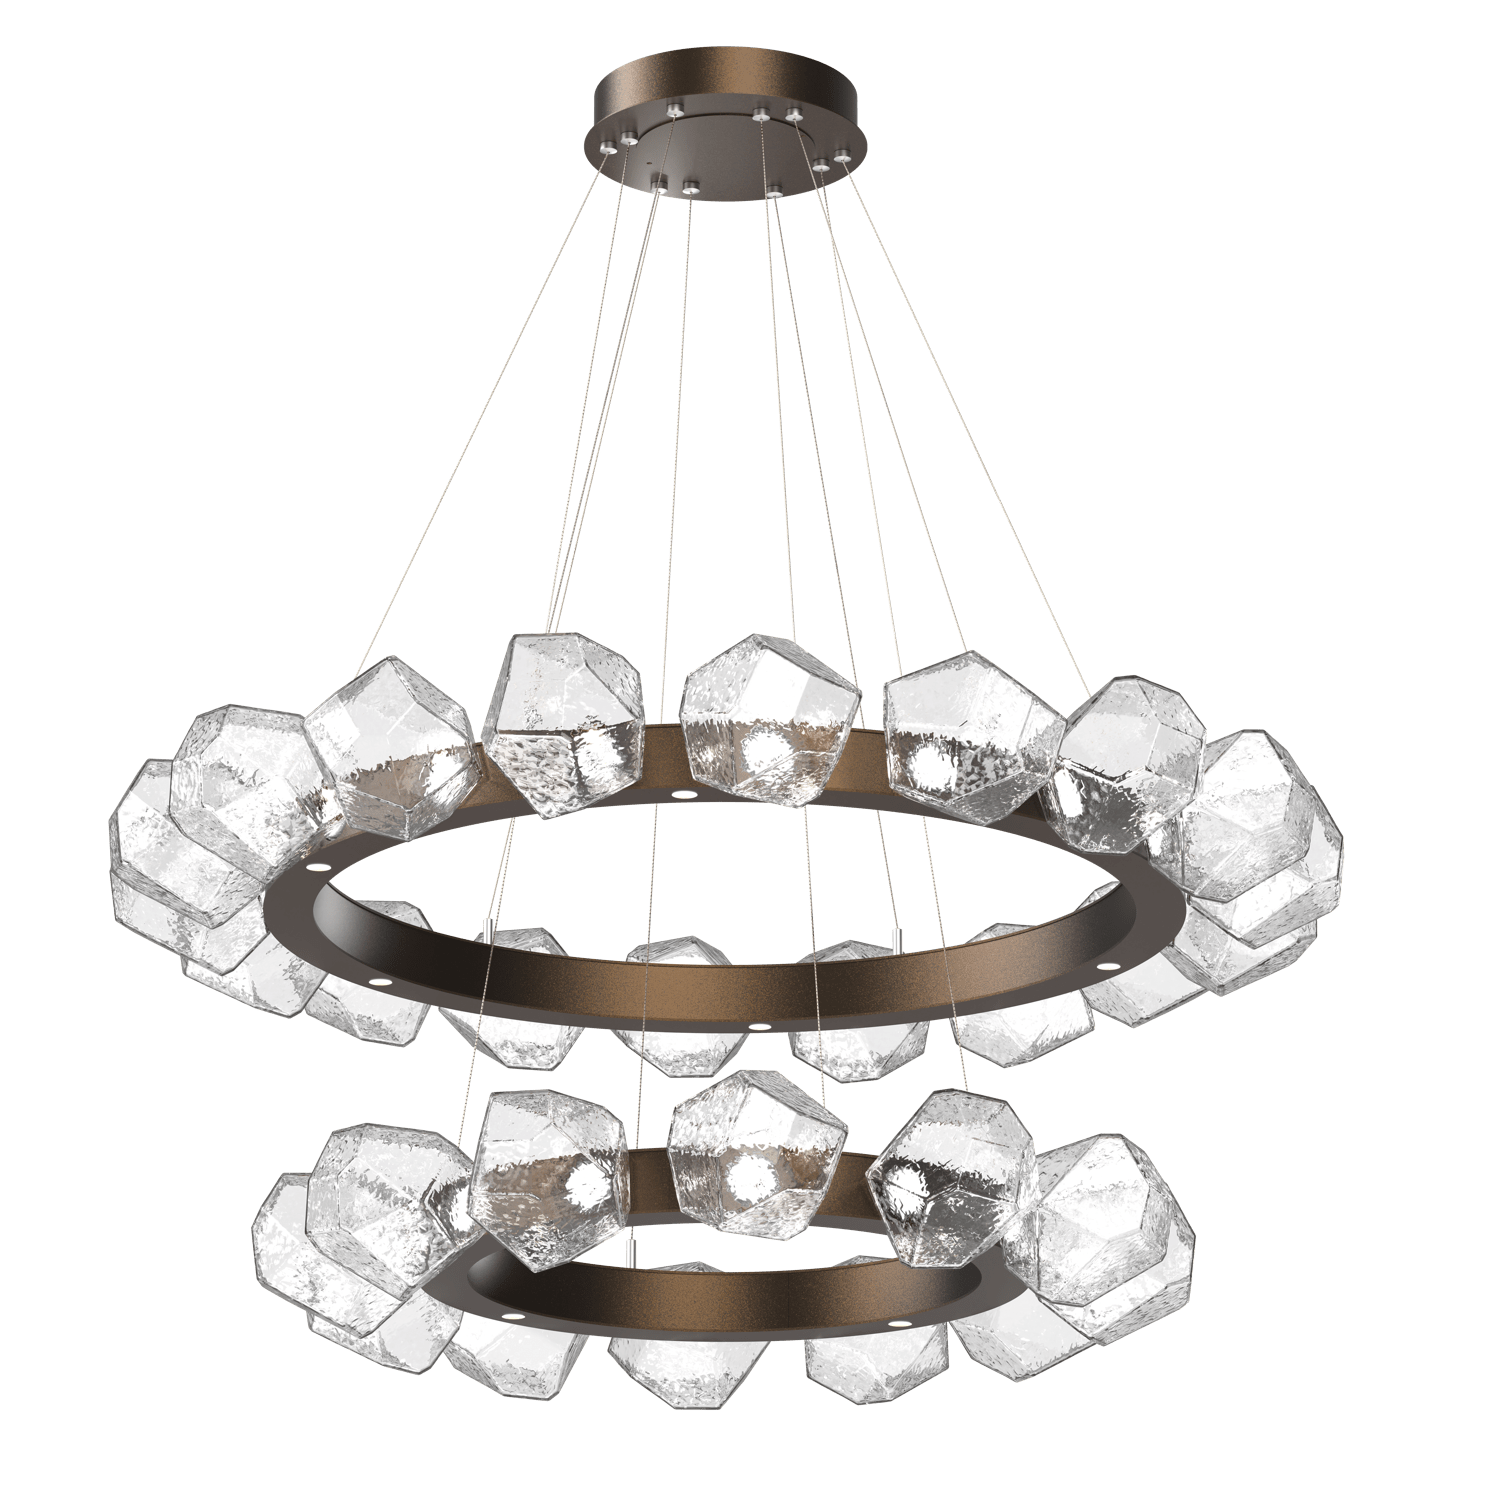 CHB0039-2T-FB-C-Hammerton-Studio-Gem-48-inch-two-tier-radial-ring-chandelier-with-flat-bronze-finish-and-clear-blown-glass-shades-and-LED-lamping